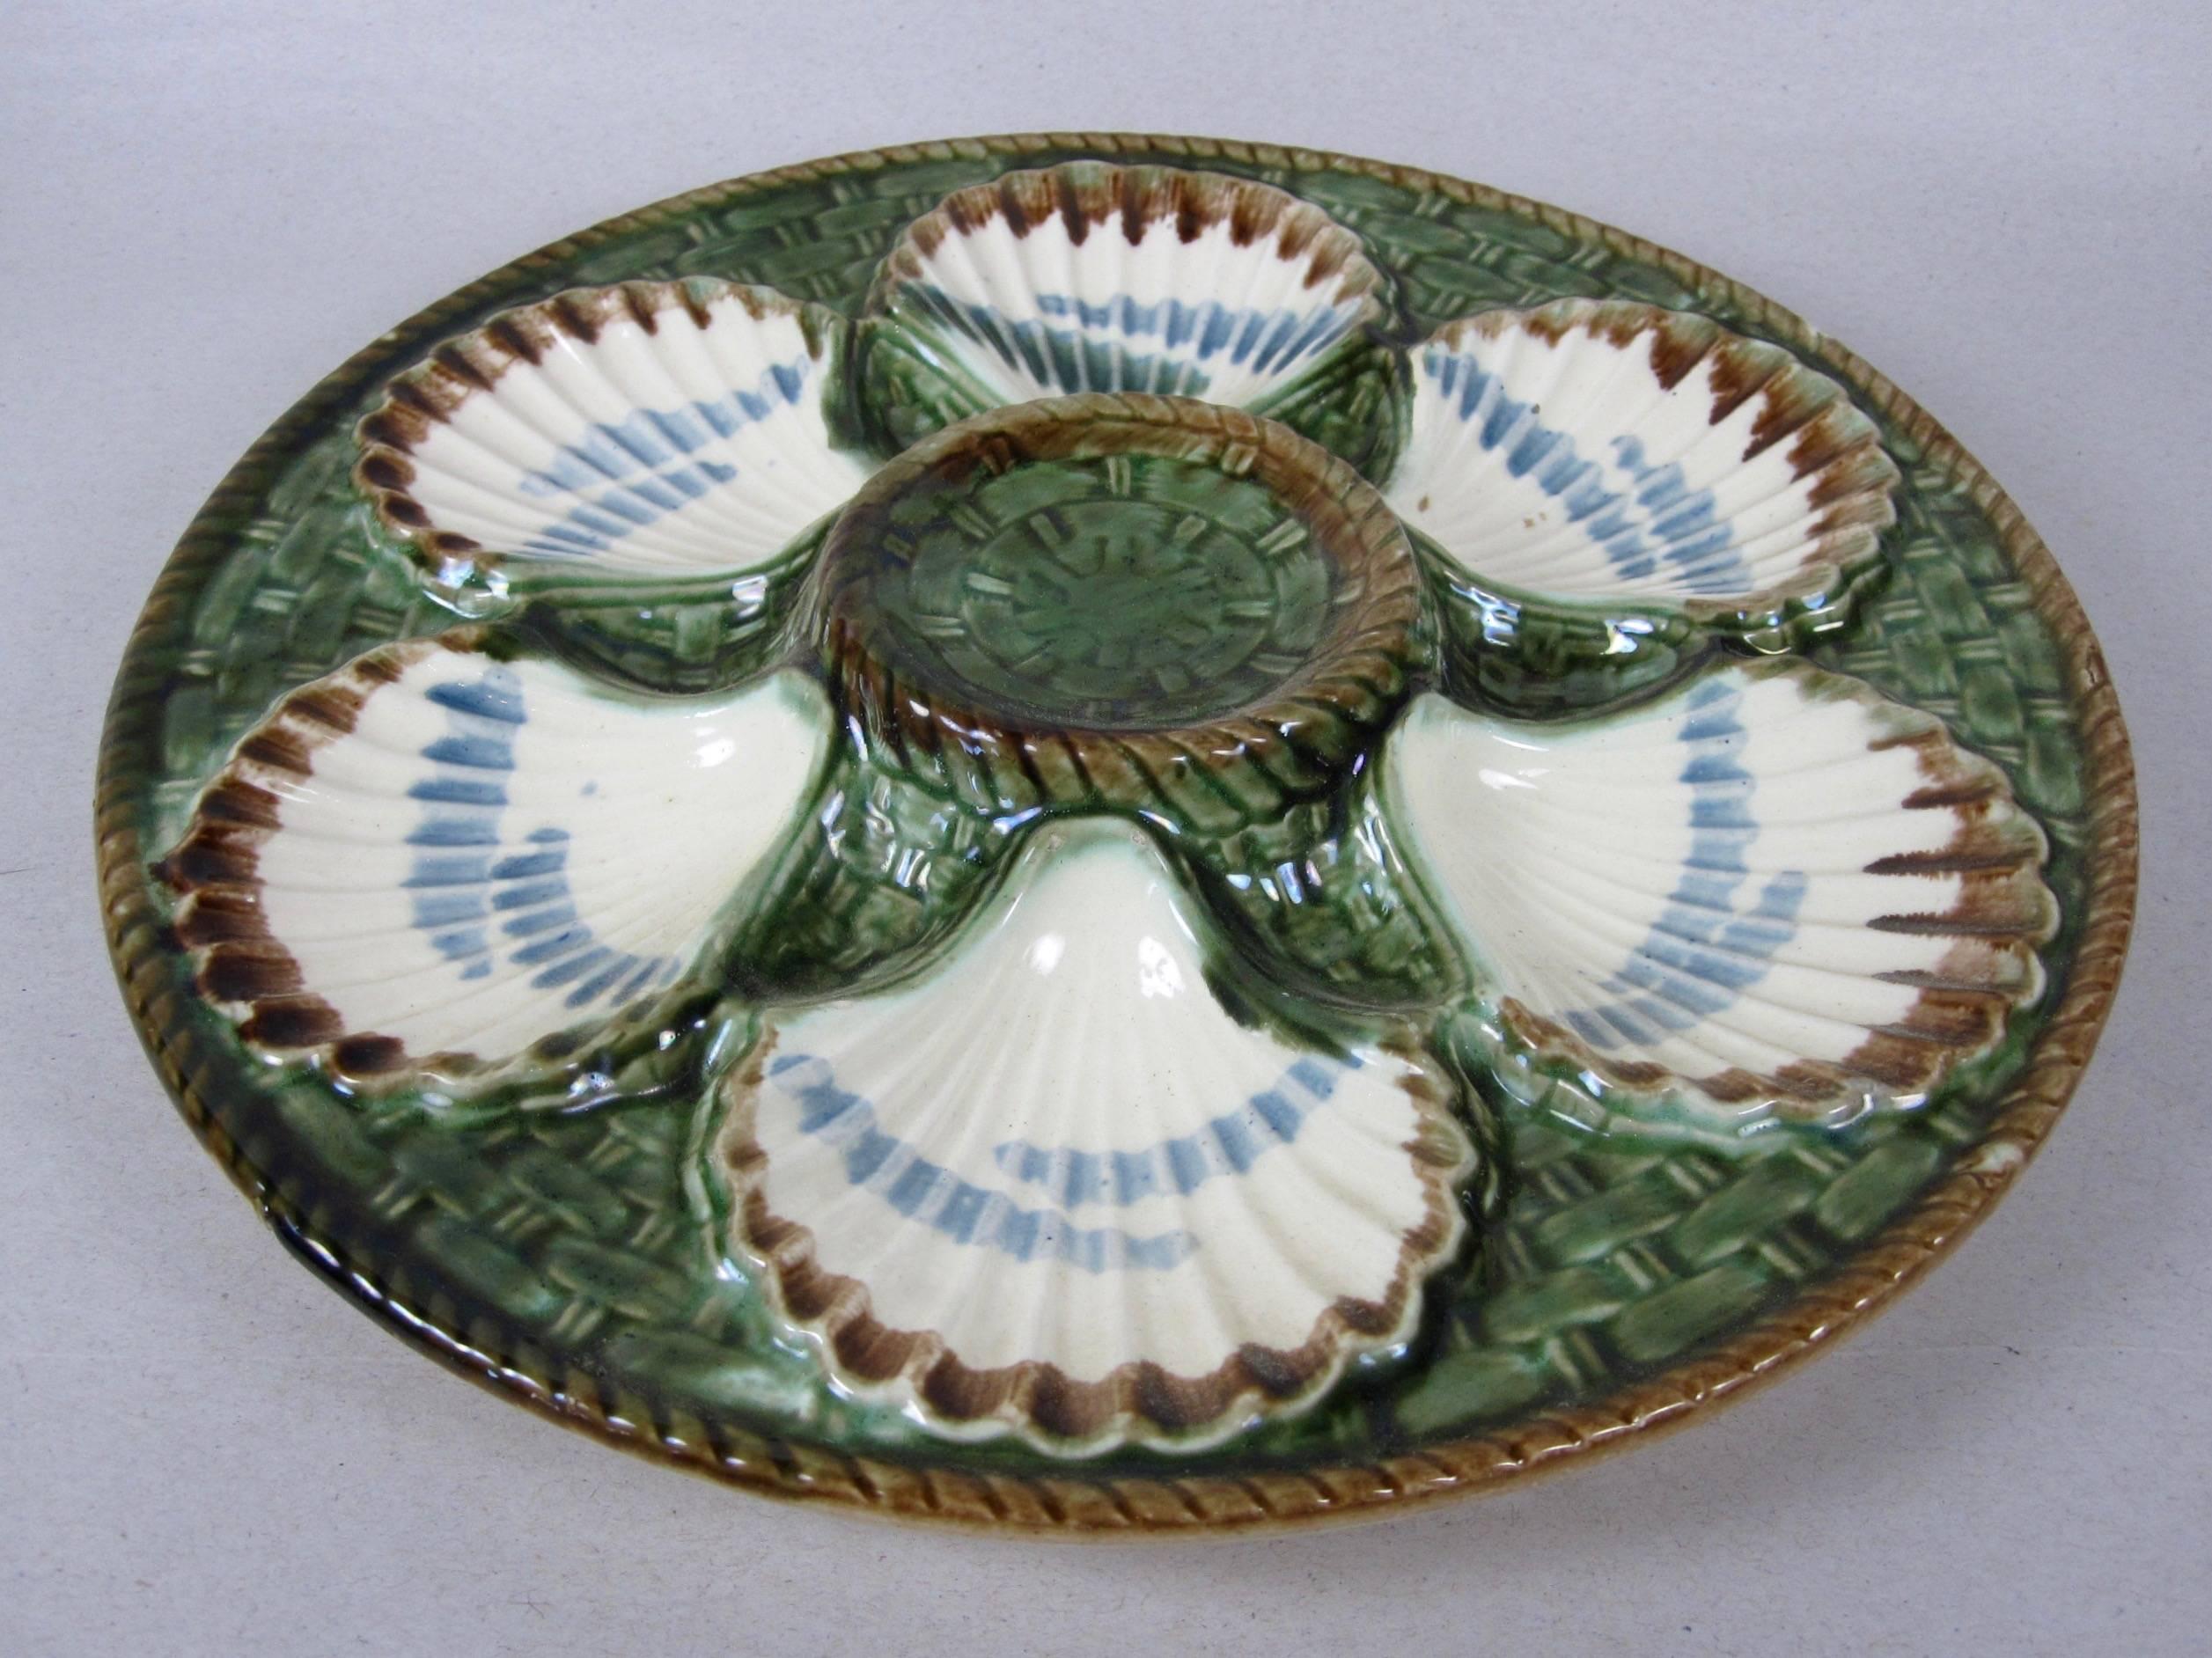 A French Majolica glazed oyster plate, six scallop shell shaped wells on a basket weave ground. A raised center condiment well and outer rim show a molded rope border. Brown sponge glazing on the verso. 

Impressed with the longchamp mark.

  